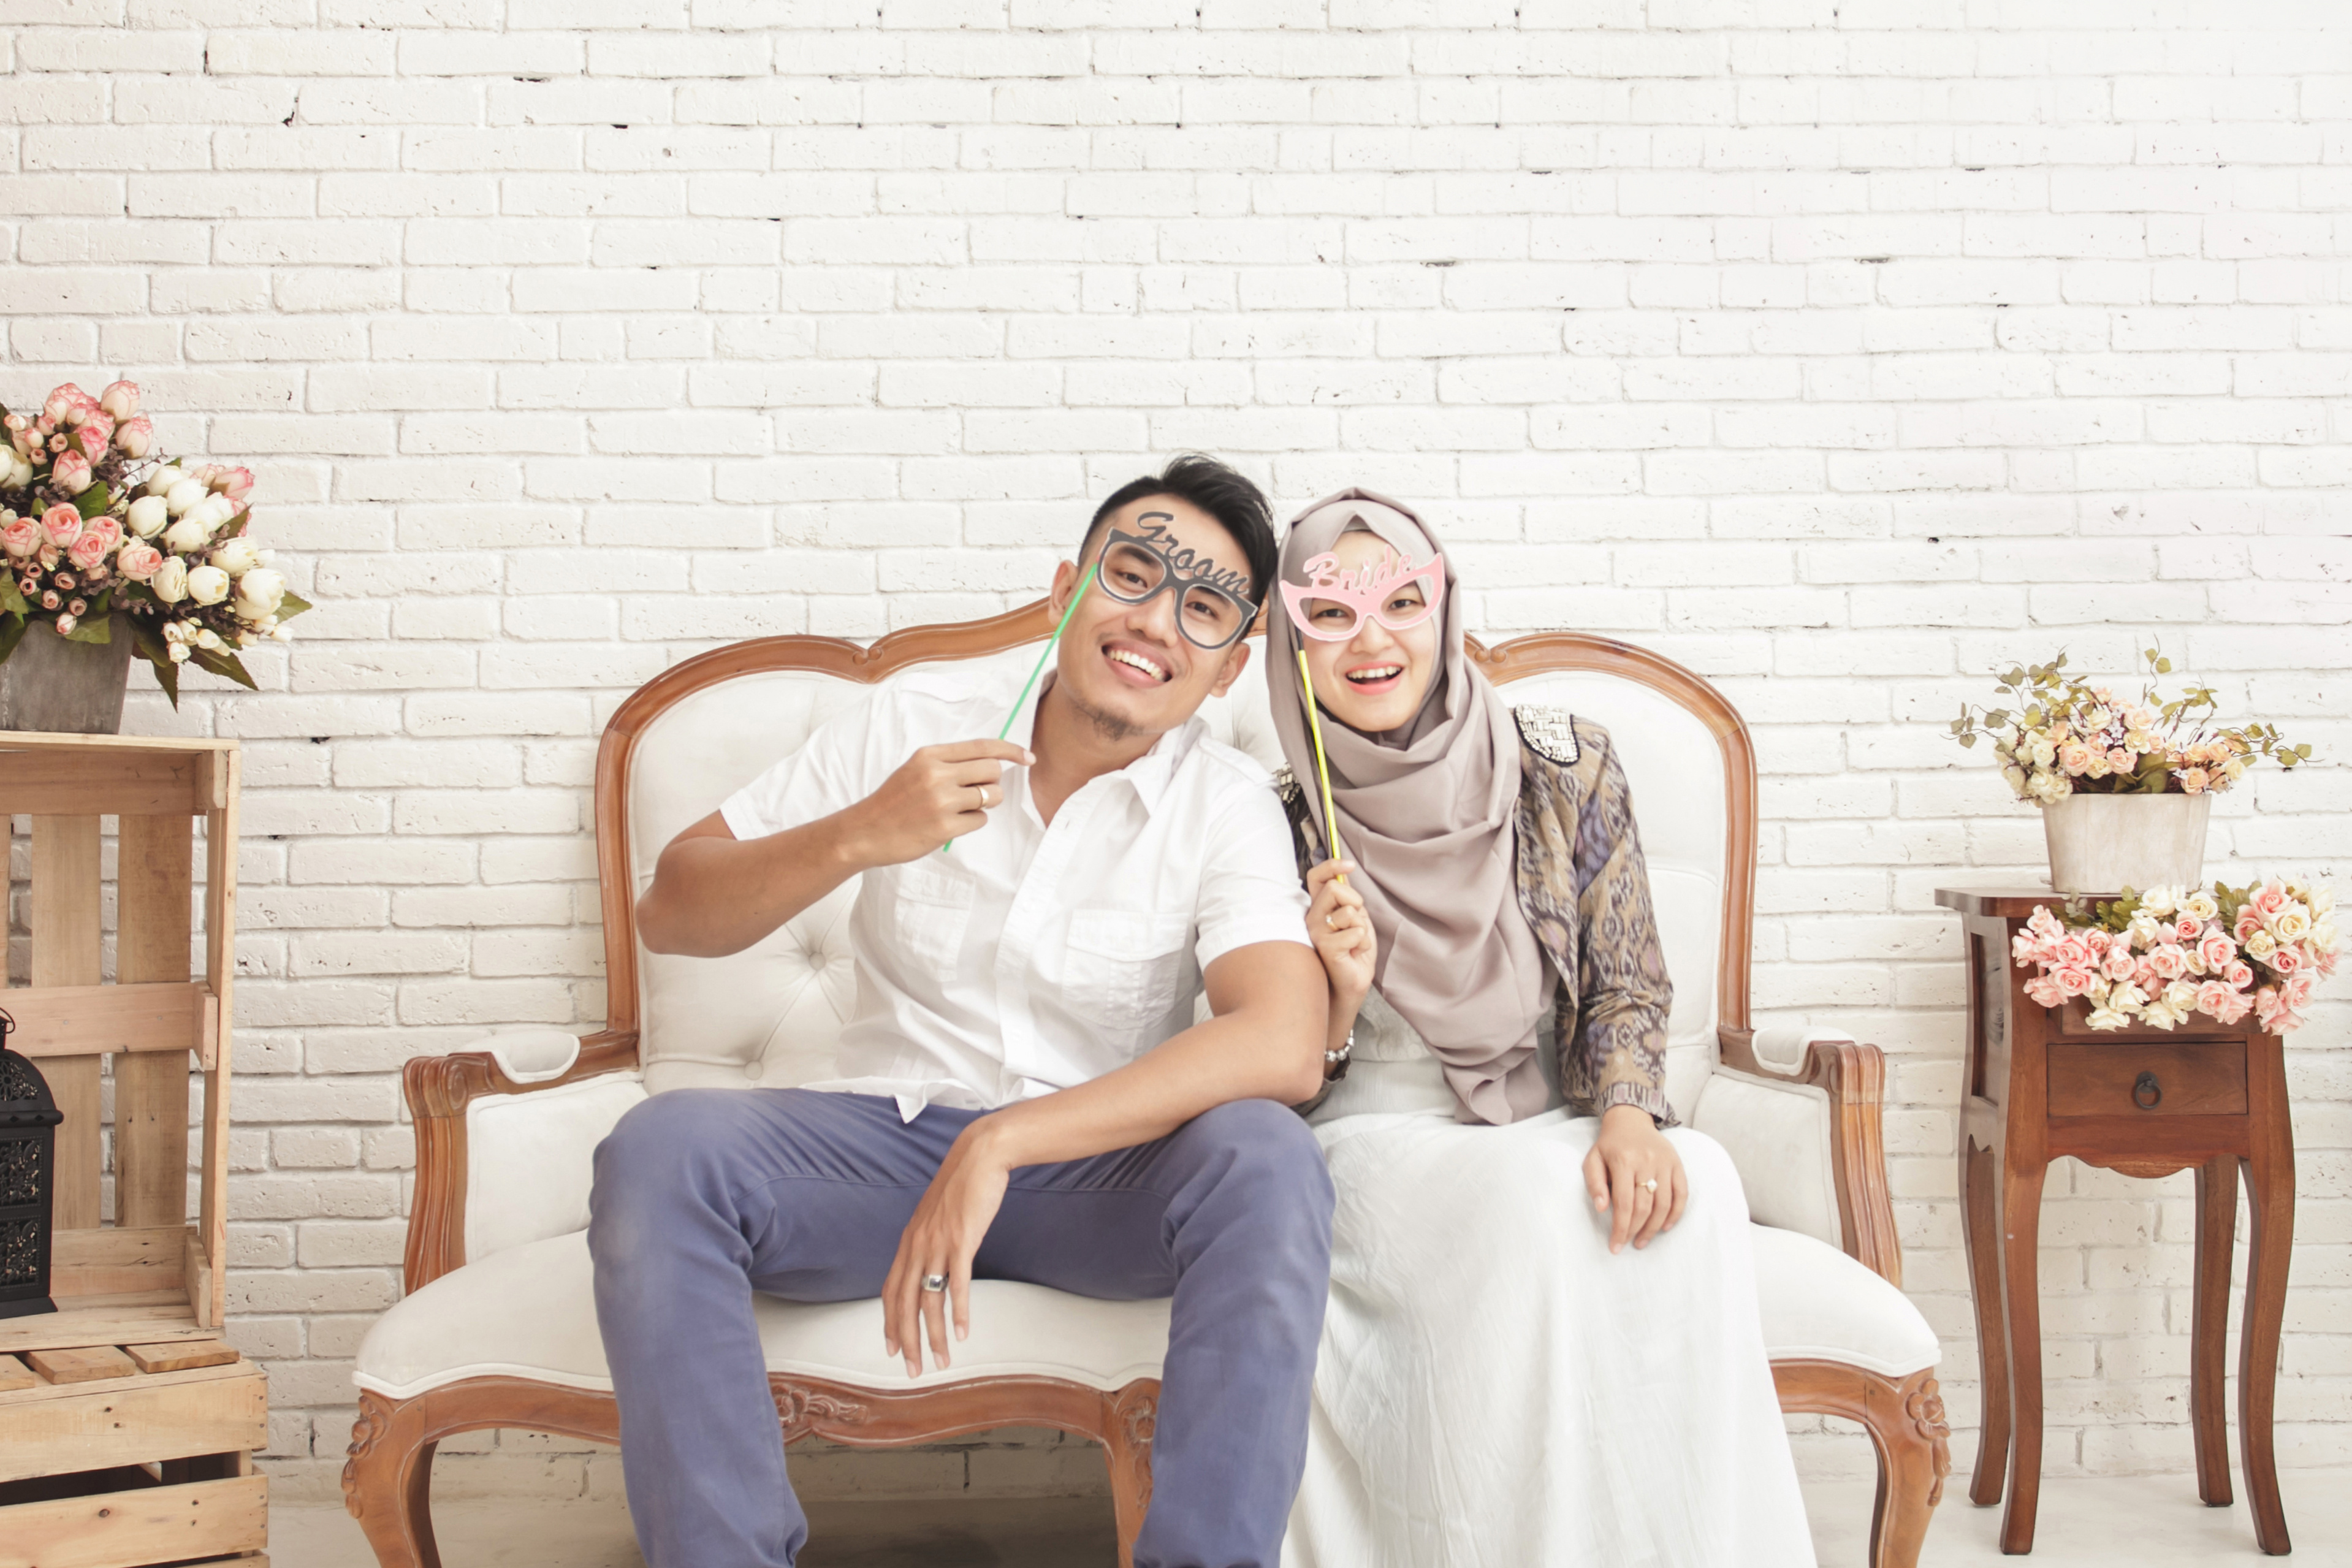 Can Free Muslim Matrimonial Sites Help You Find Love?